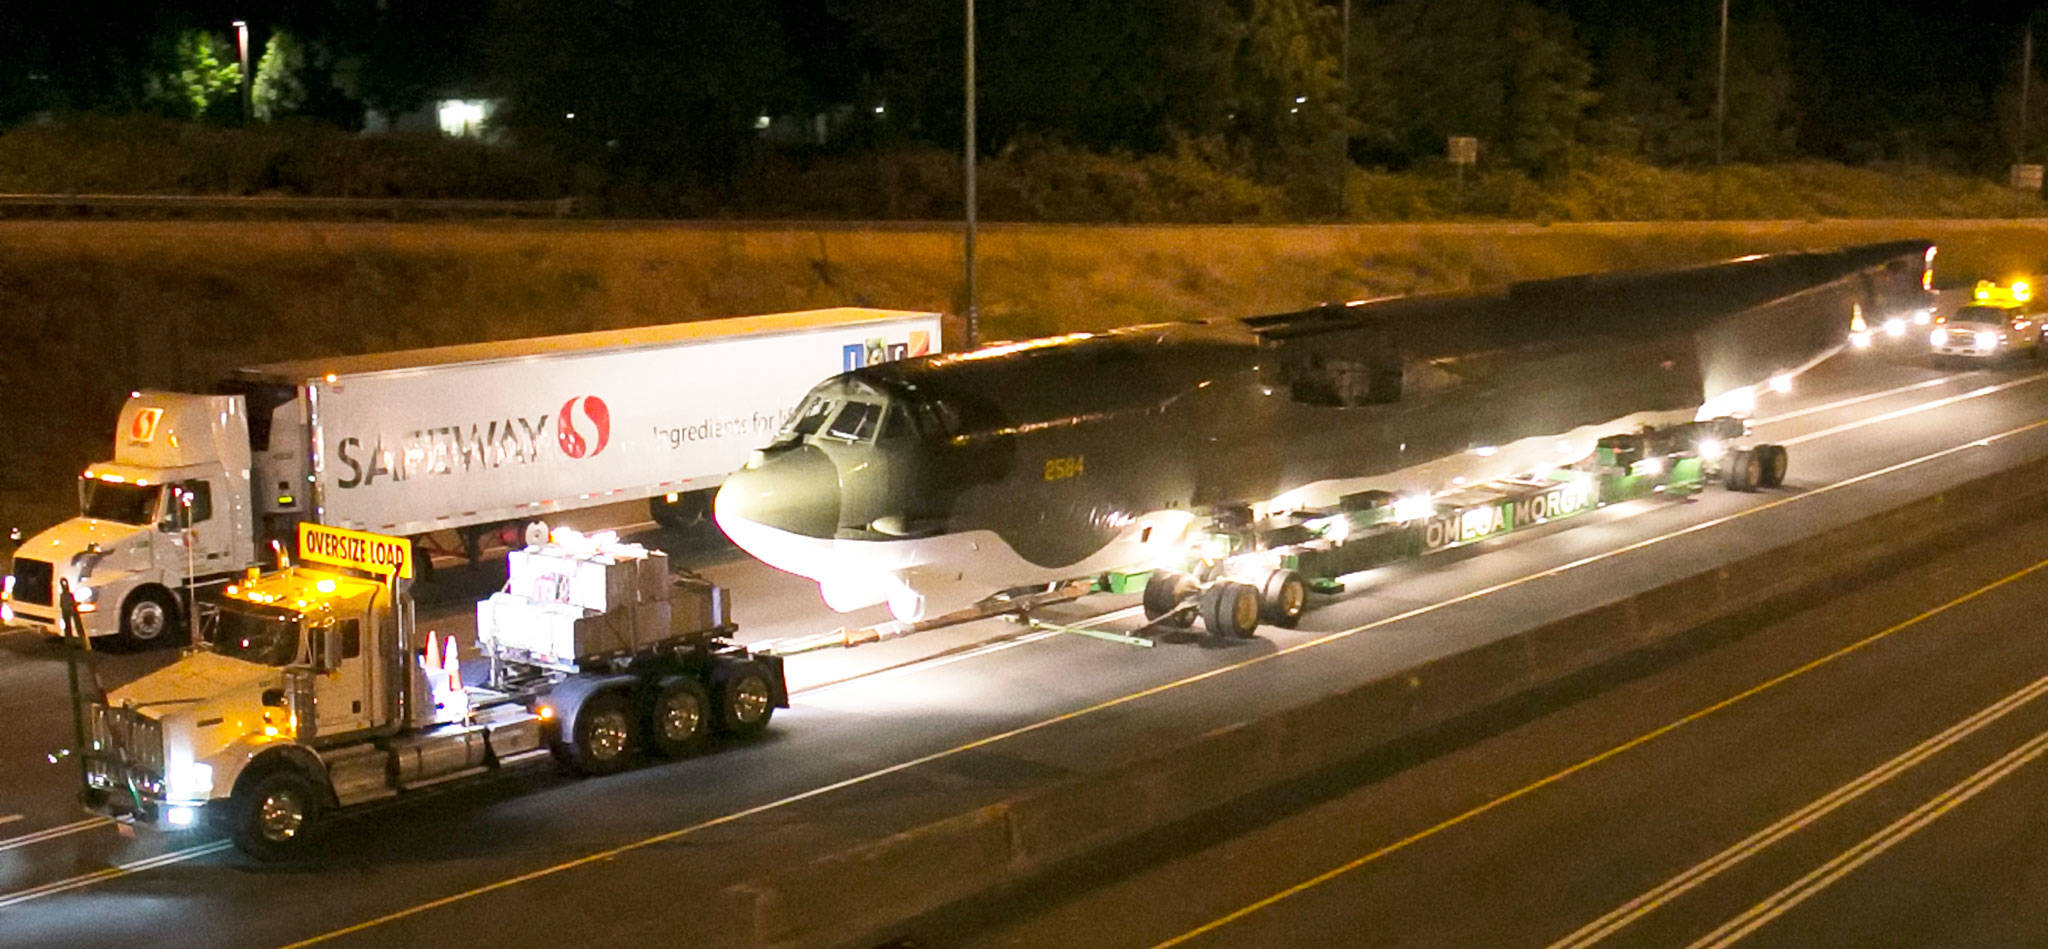 The B-52 “Midnight Express” is towed along I-405 while en route from Paine Field in Everett to the Museum of Flight at Boeing Field in Seattle early Sunday morning. (Kevin Clark / The Herald)